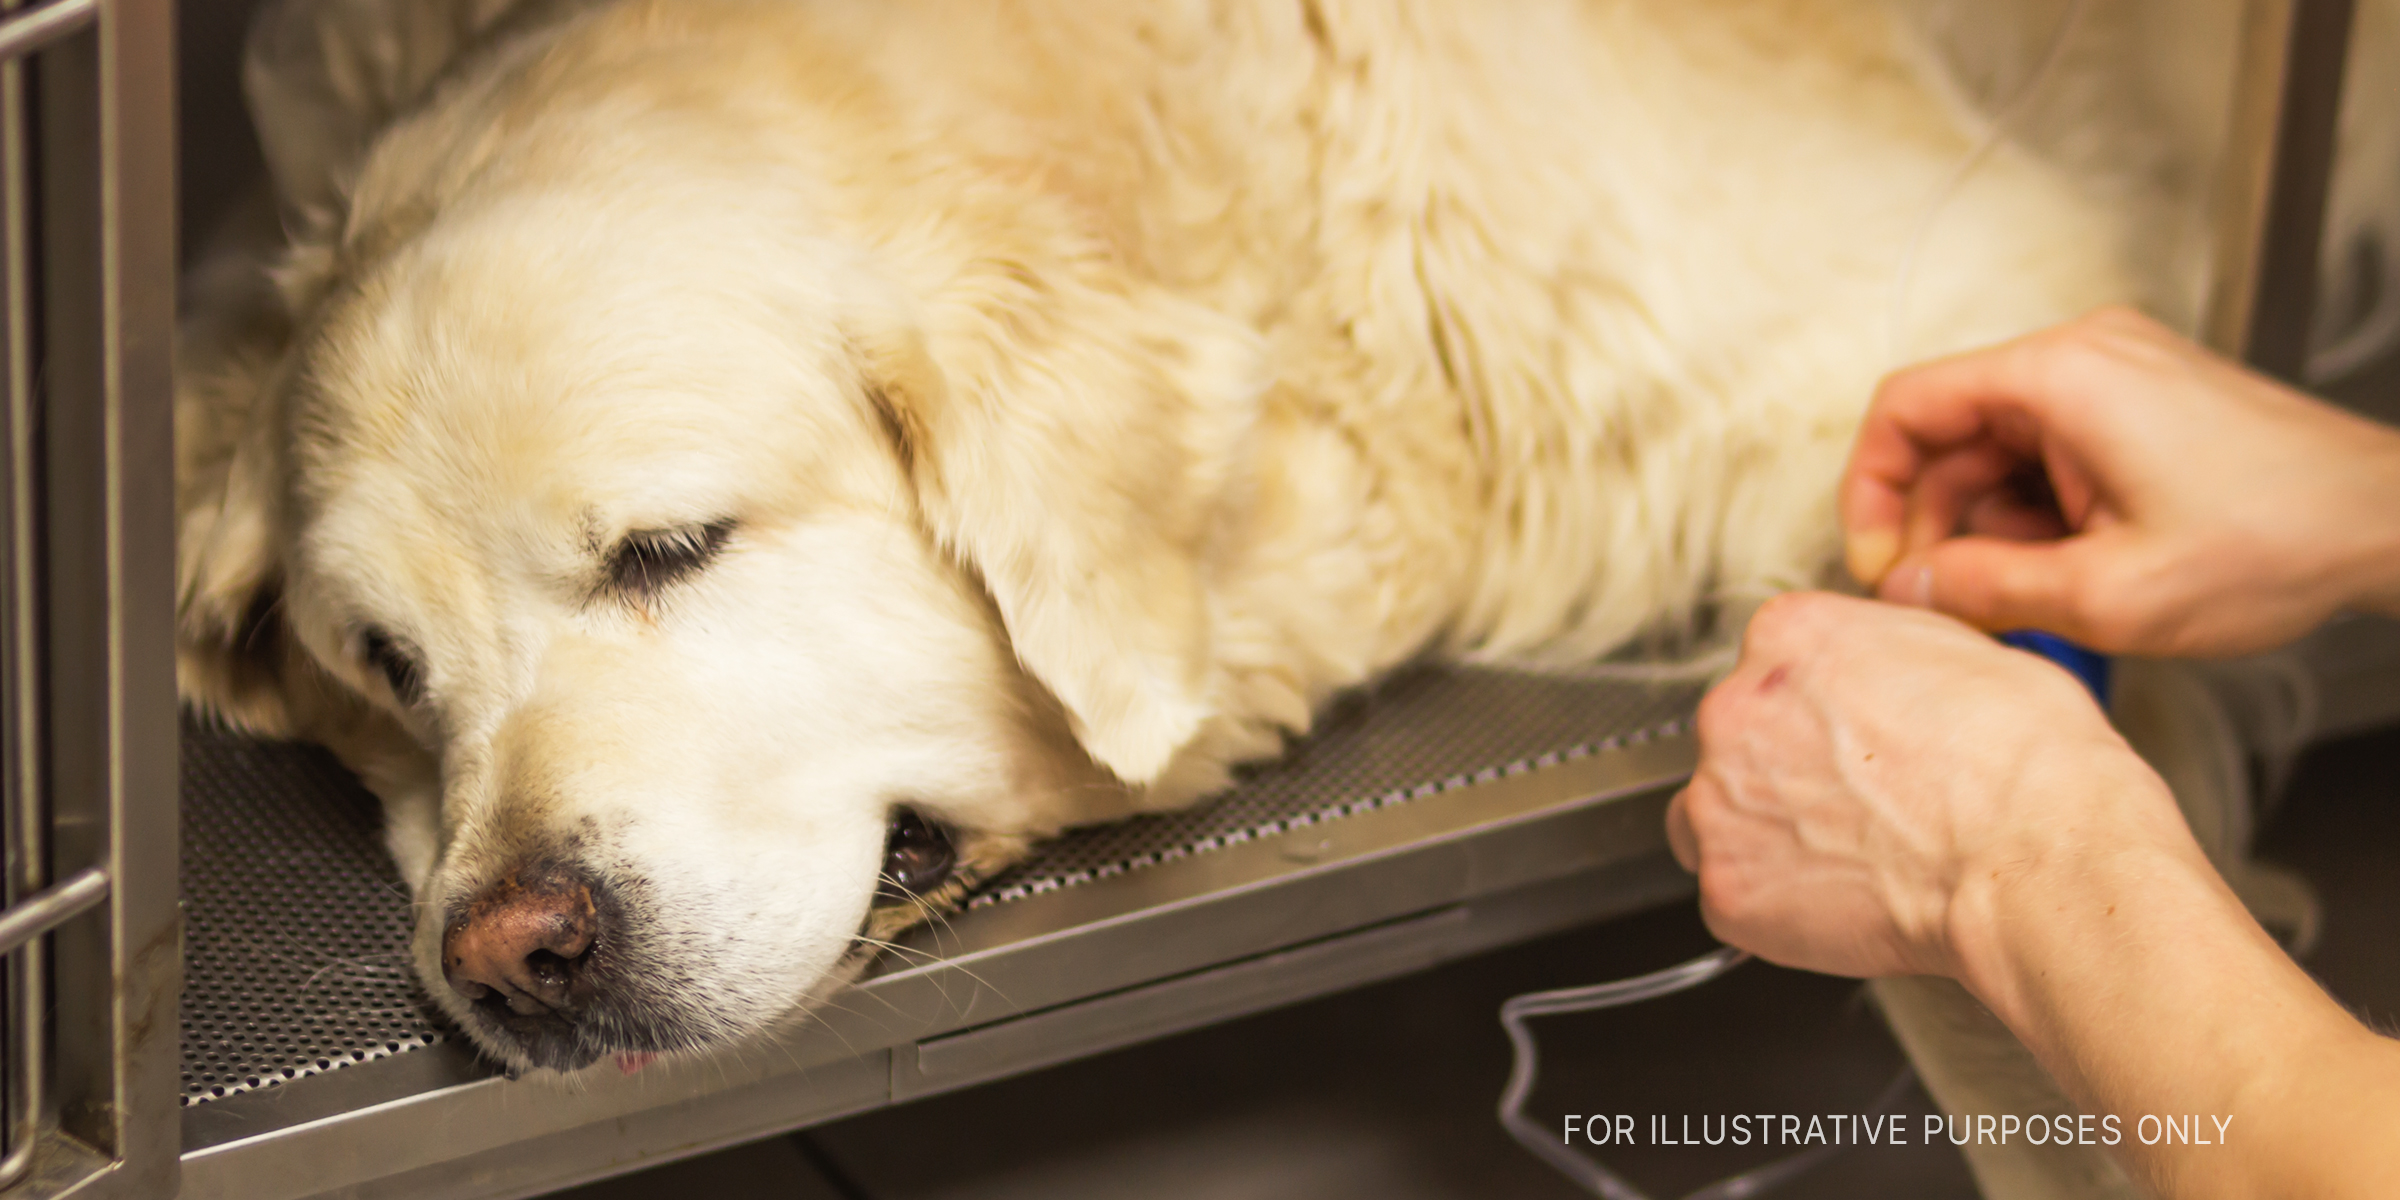 A sick dog being treated with an I.V. | Source: Shutterstock